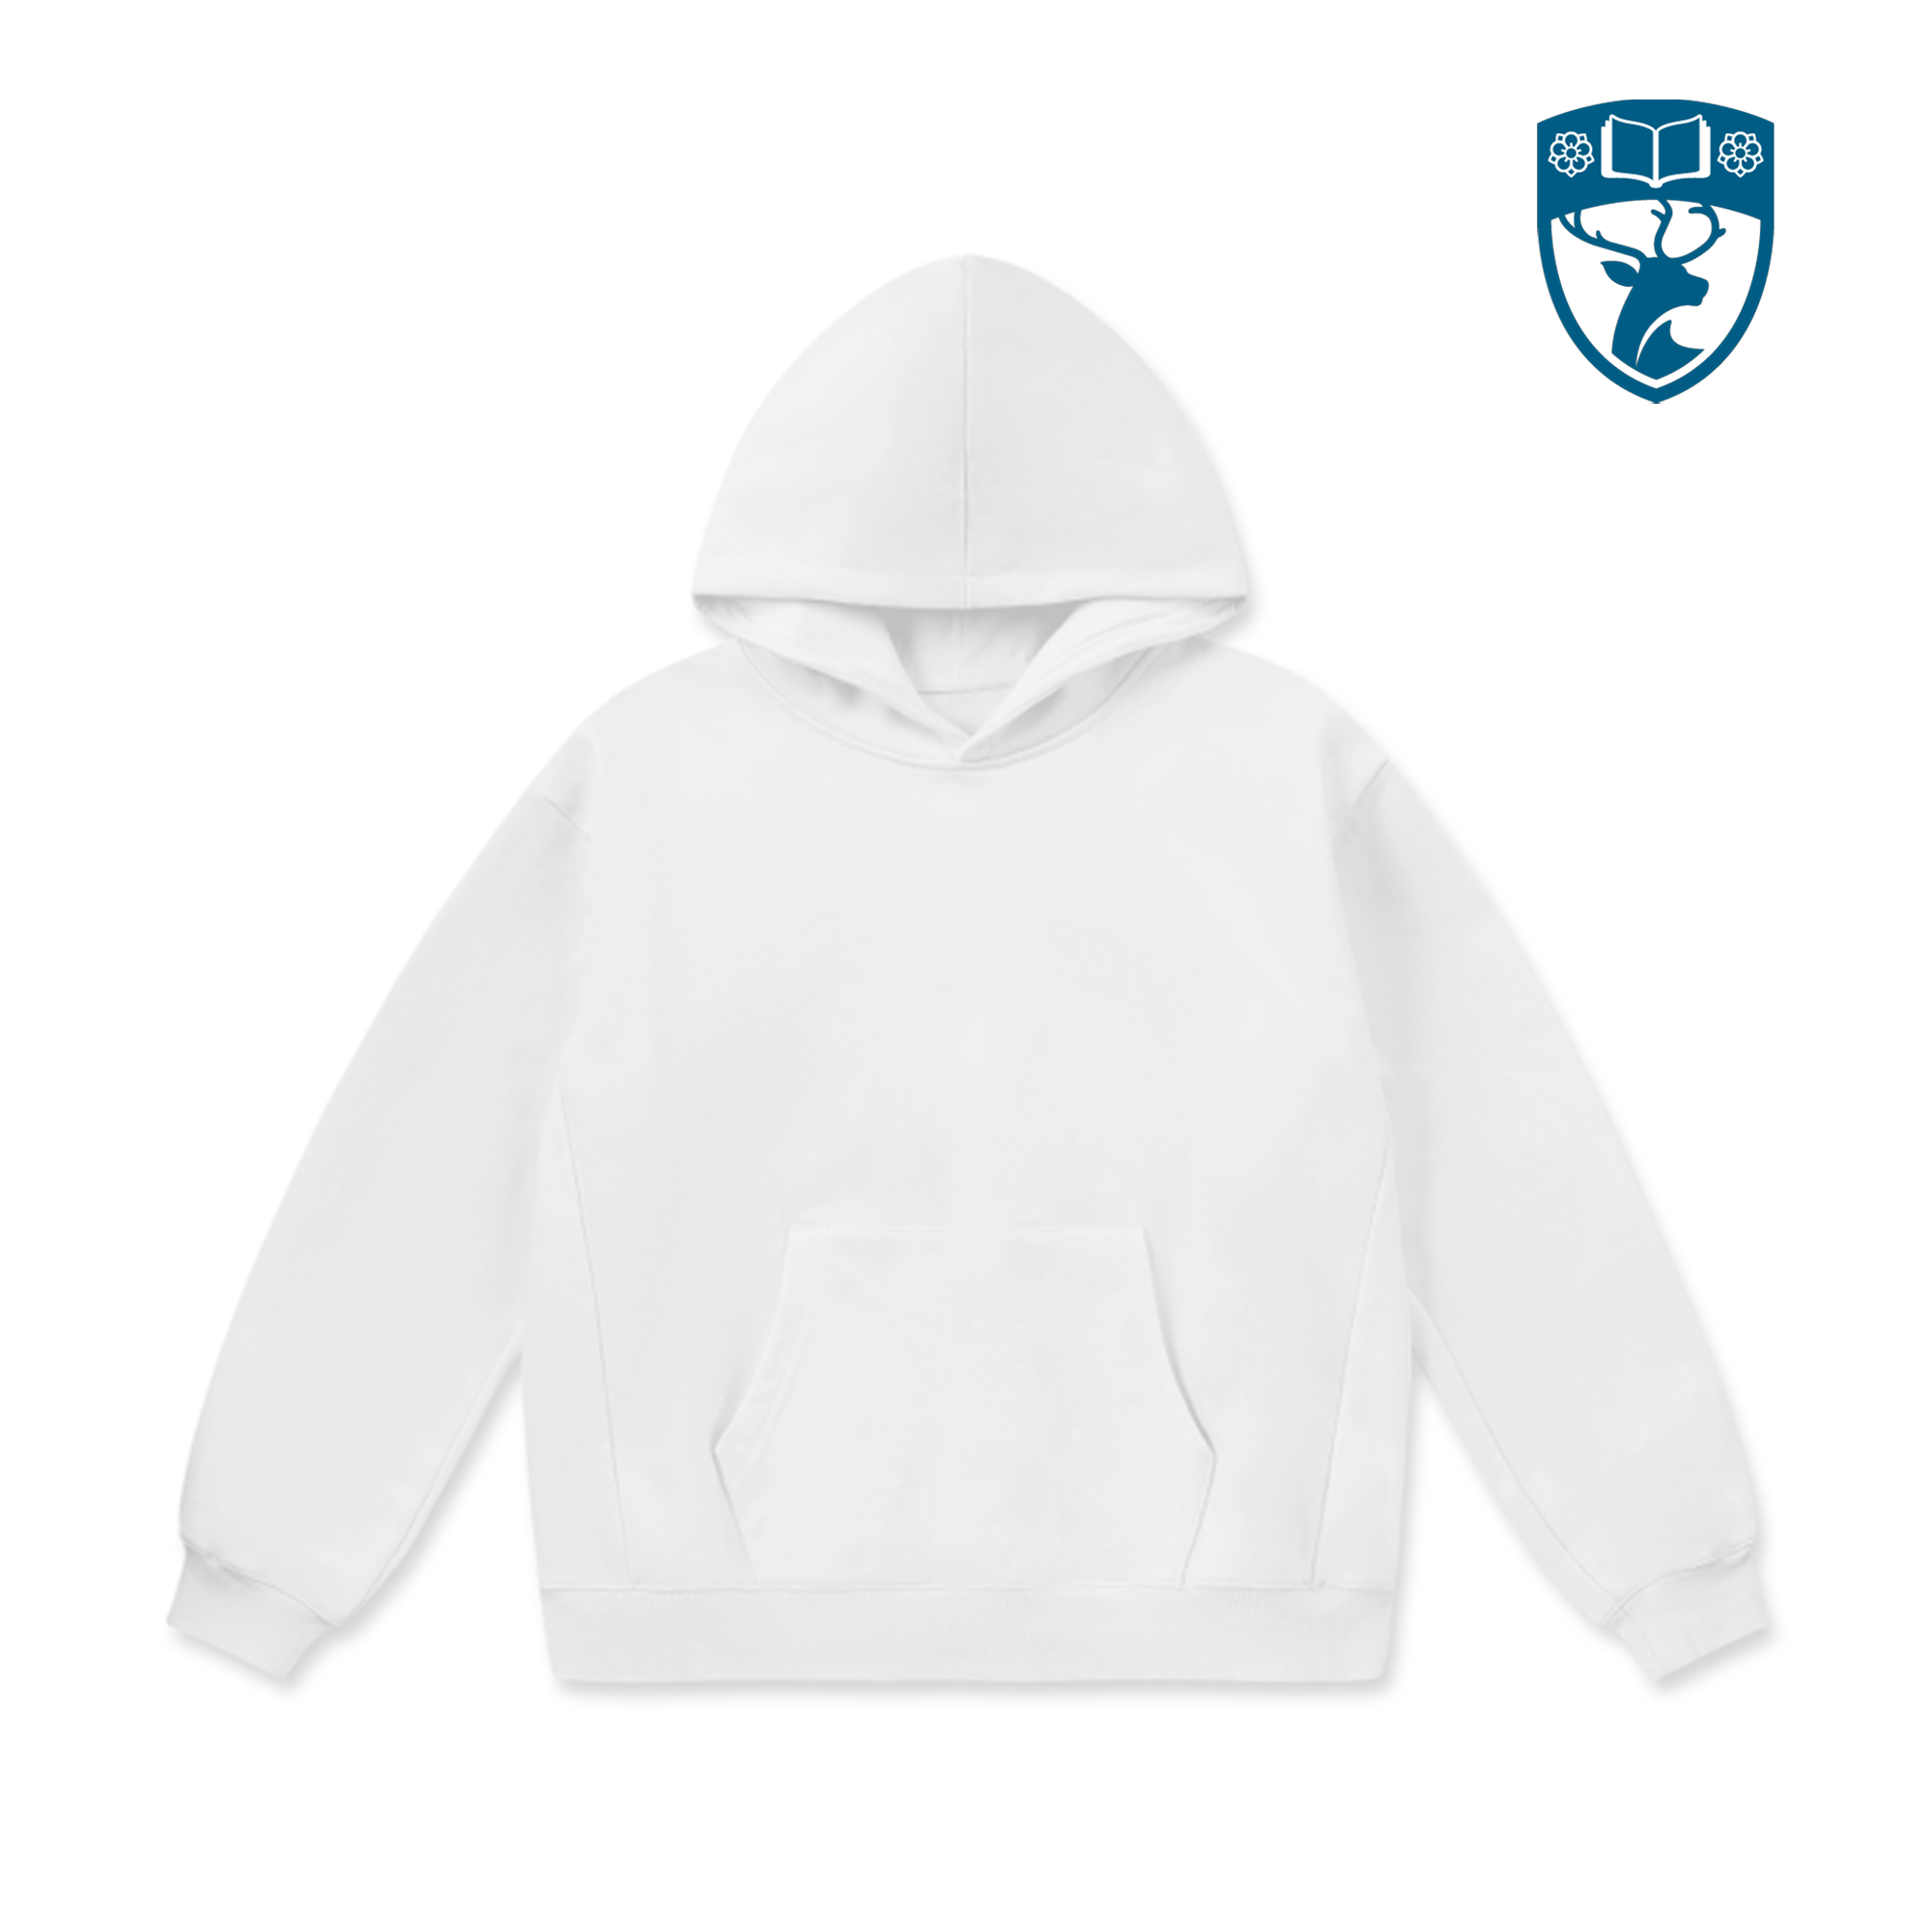 LCC Super Weighted Hoodie - University of Southampton (Classic)